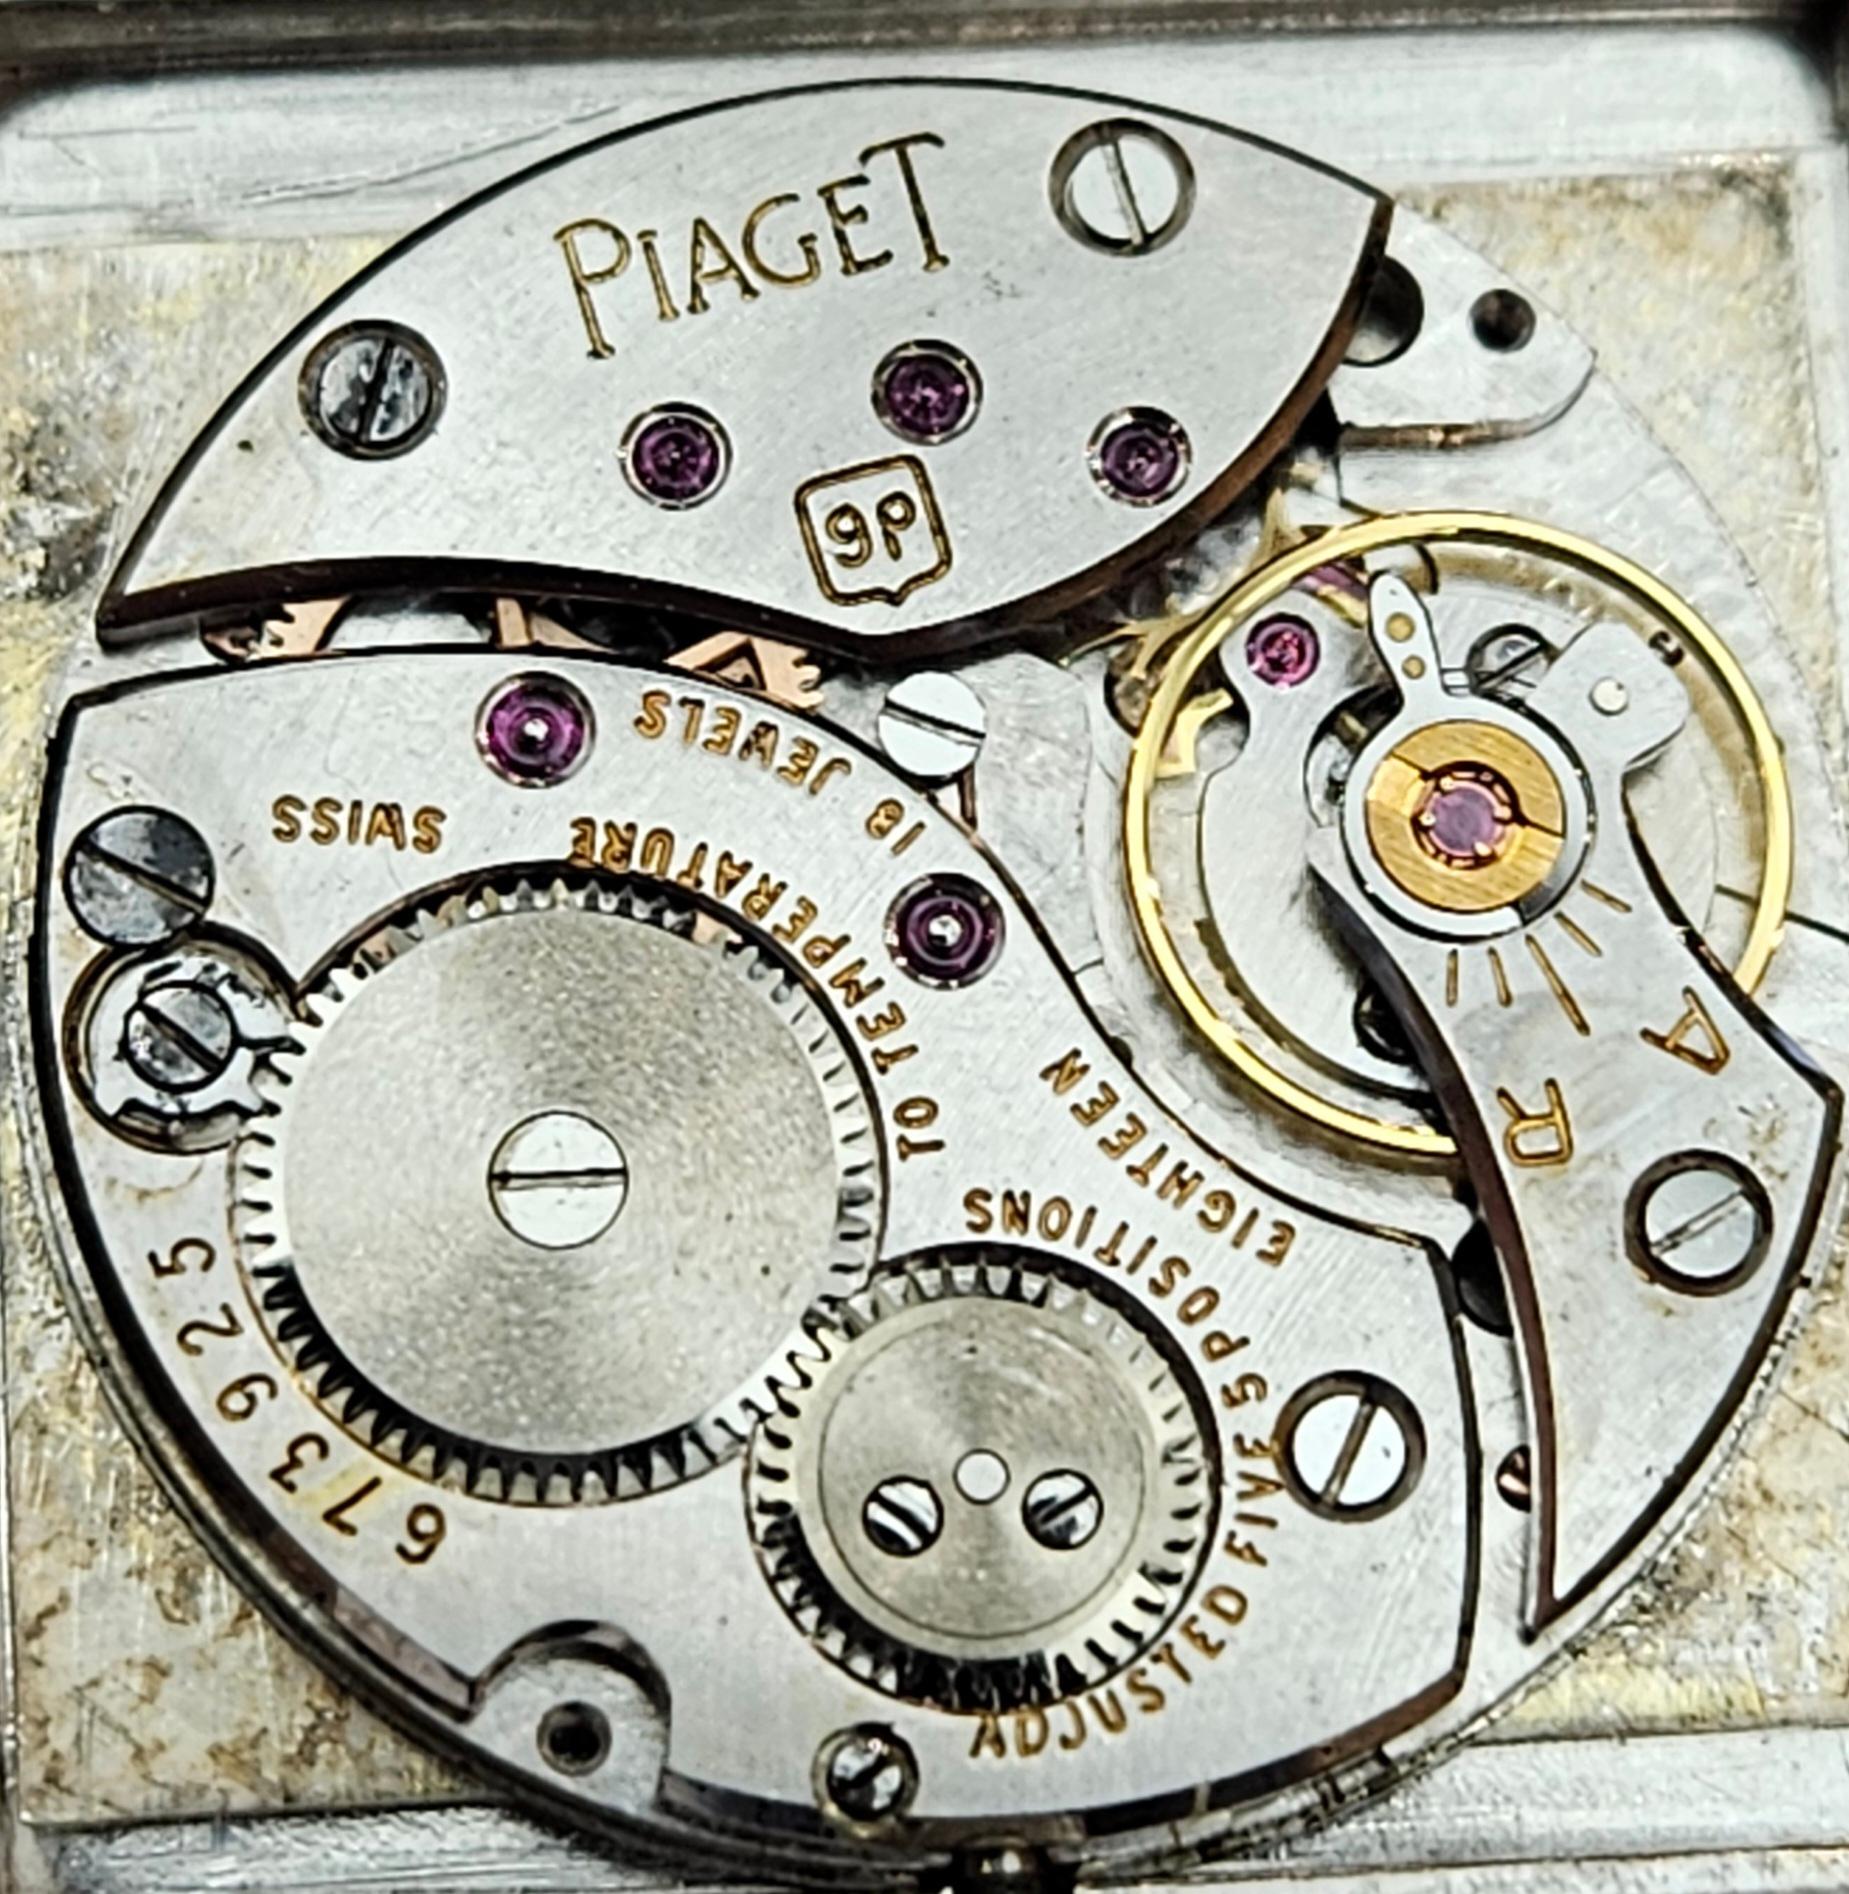 18 kt. White Gold Piaget Wrist Watch, Manual Winding Ultra Thin, Collectors For Sale 3